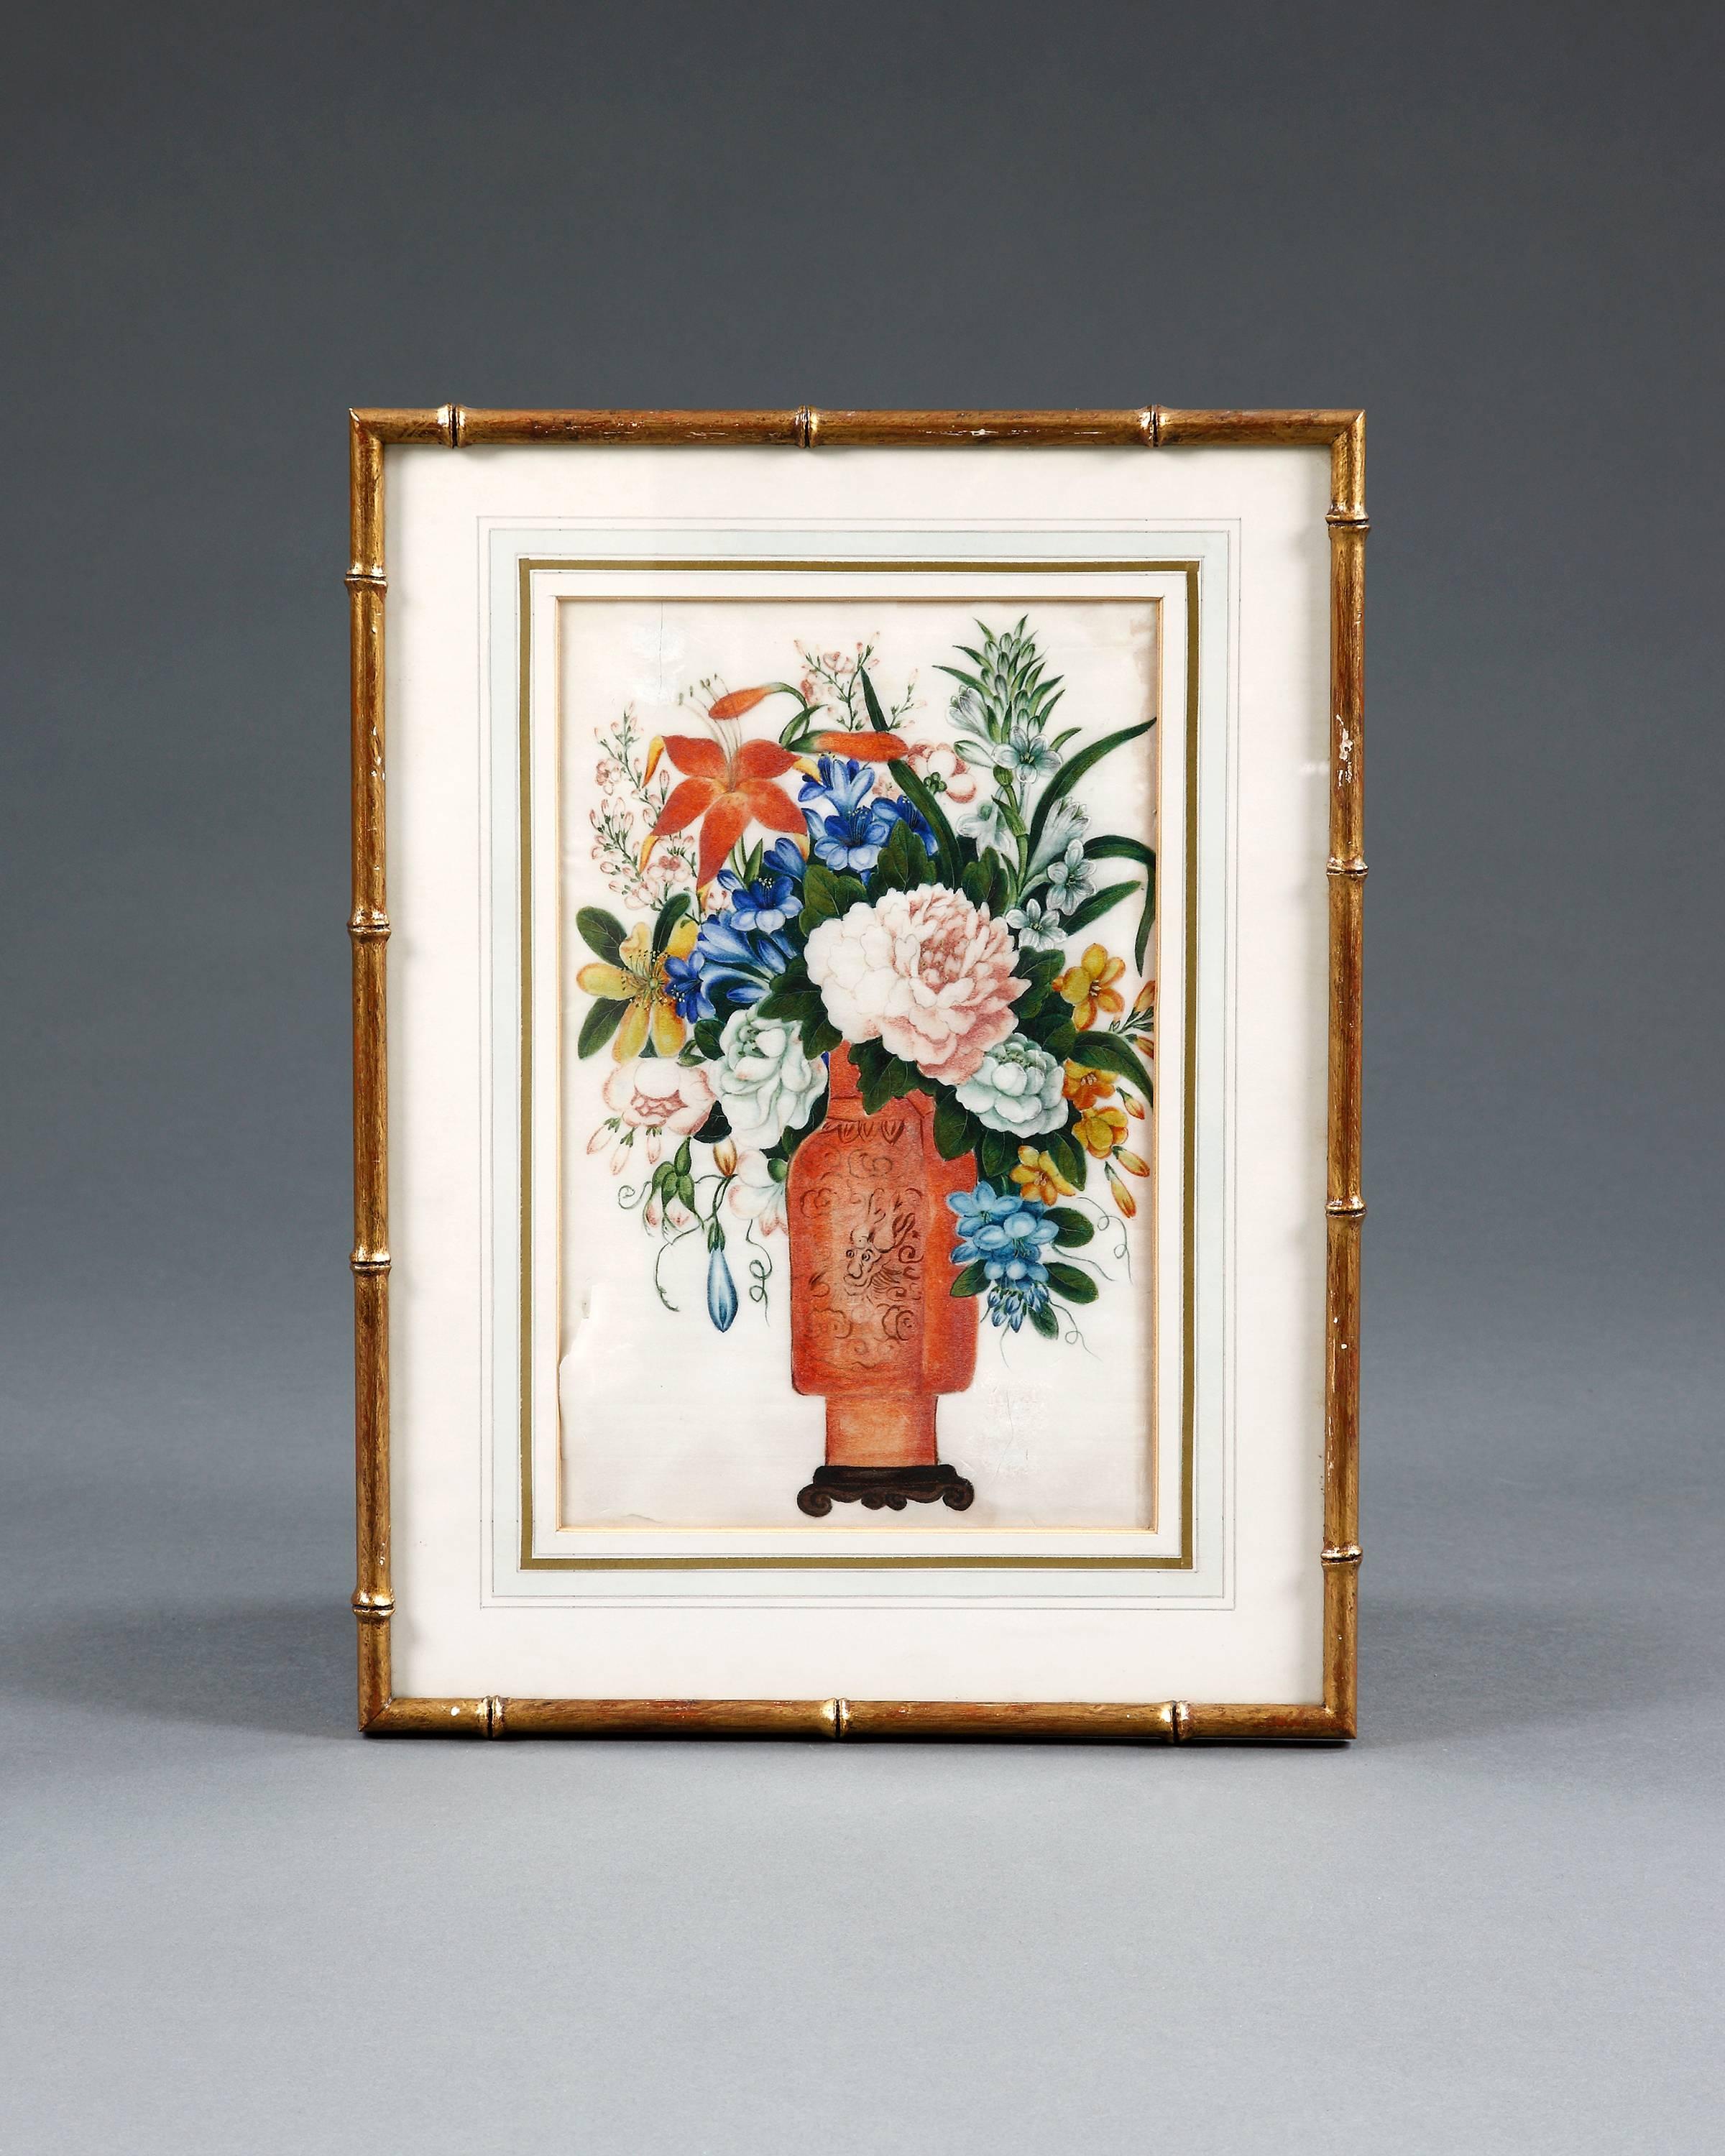 China trade. Set of four watercolors, botanical studies on pith paper. The whole is finely executed in watercolor. Held in later simulated gilt-bamboo frames, Chinese, circa 1810.